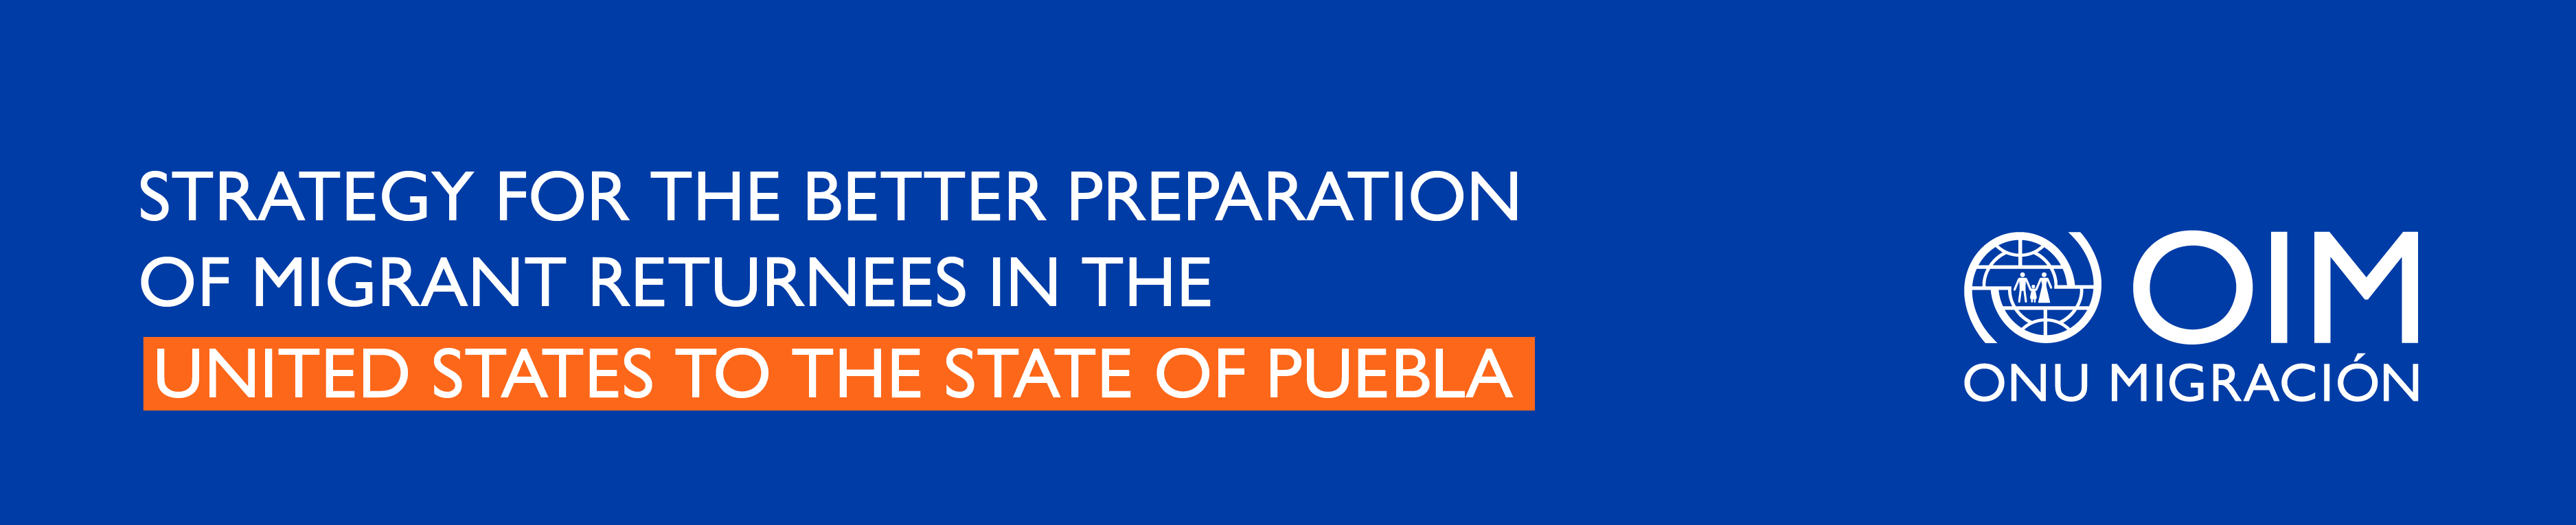 Strategy for the better preparation of migrant returnees in the United States to the State of Puebla